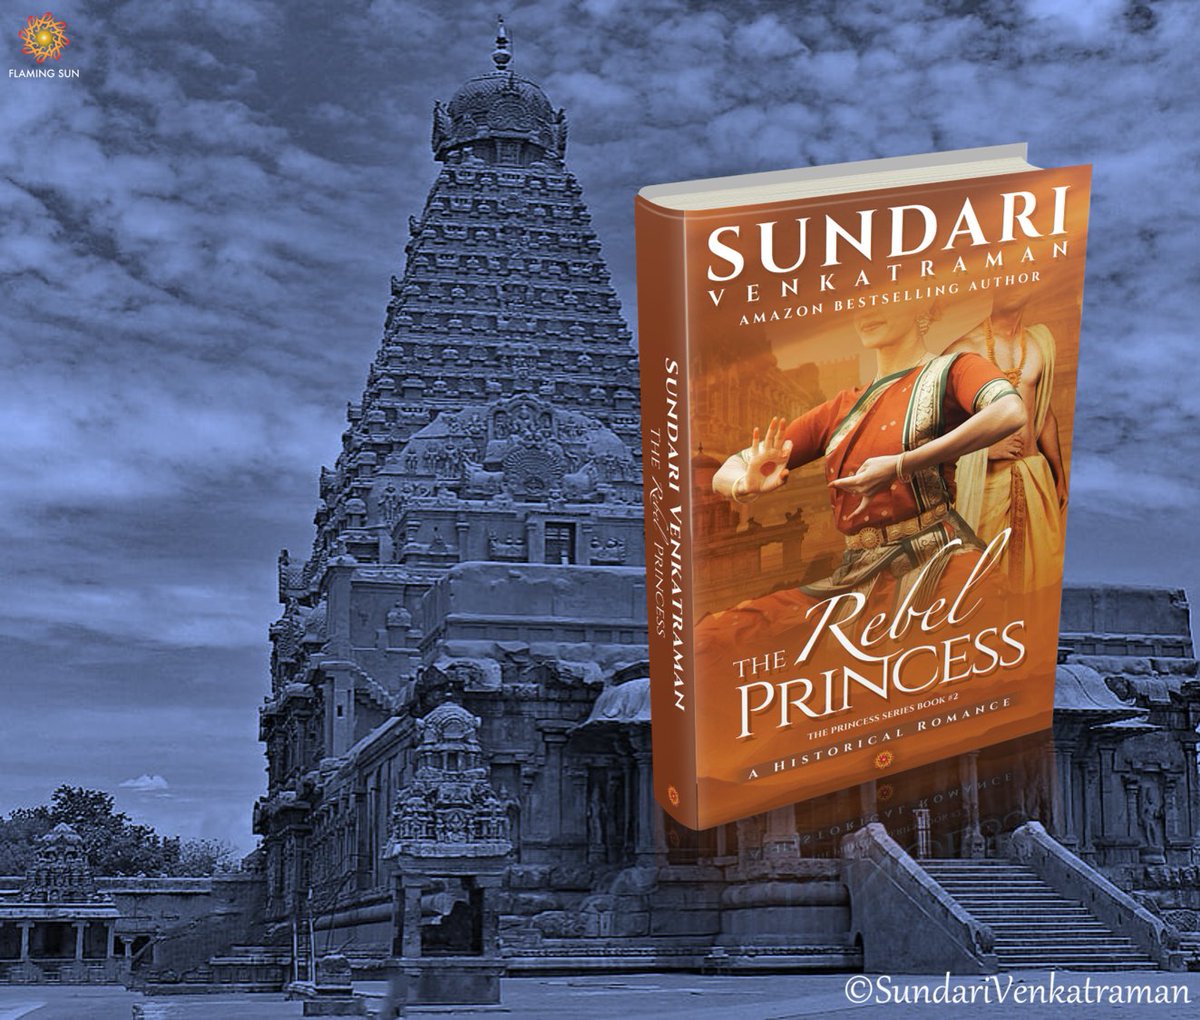 THE REBEL PRINCESS #ThePrincessSeries #HistoricalRomance #SundariVenkatraman #bestseller #paperback @BNBuzz The earth quakes and the skies shiver when Chamundeswari and Vijayendran come face to face. But is everything what it appears to be on the surface? tinyurl.com/3ke3rn4d